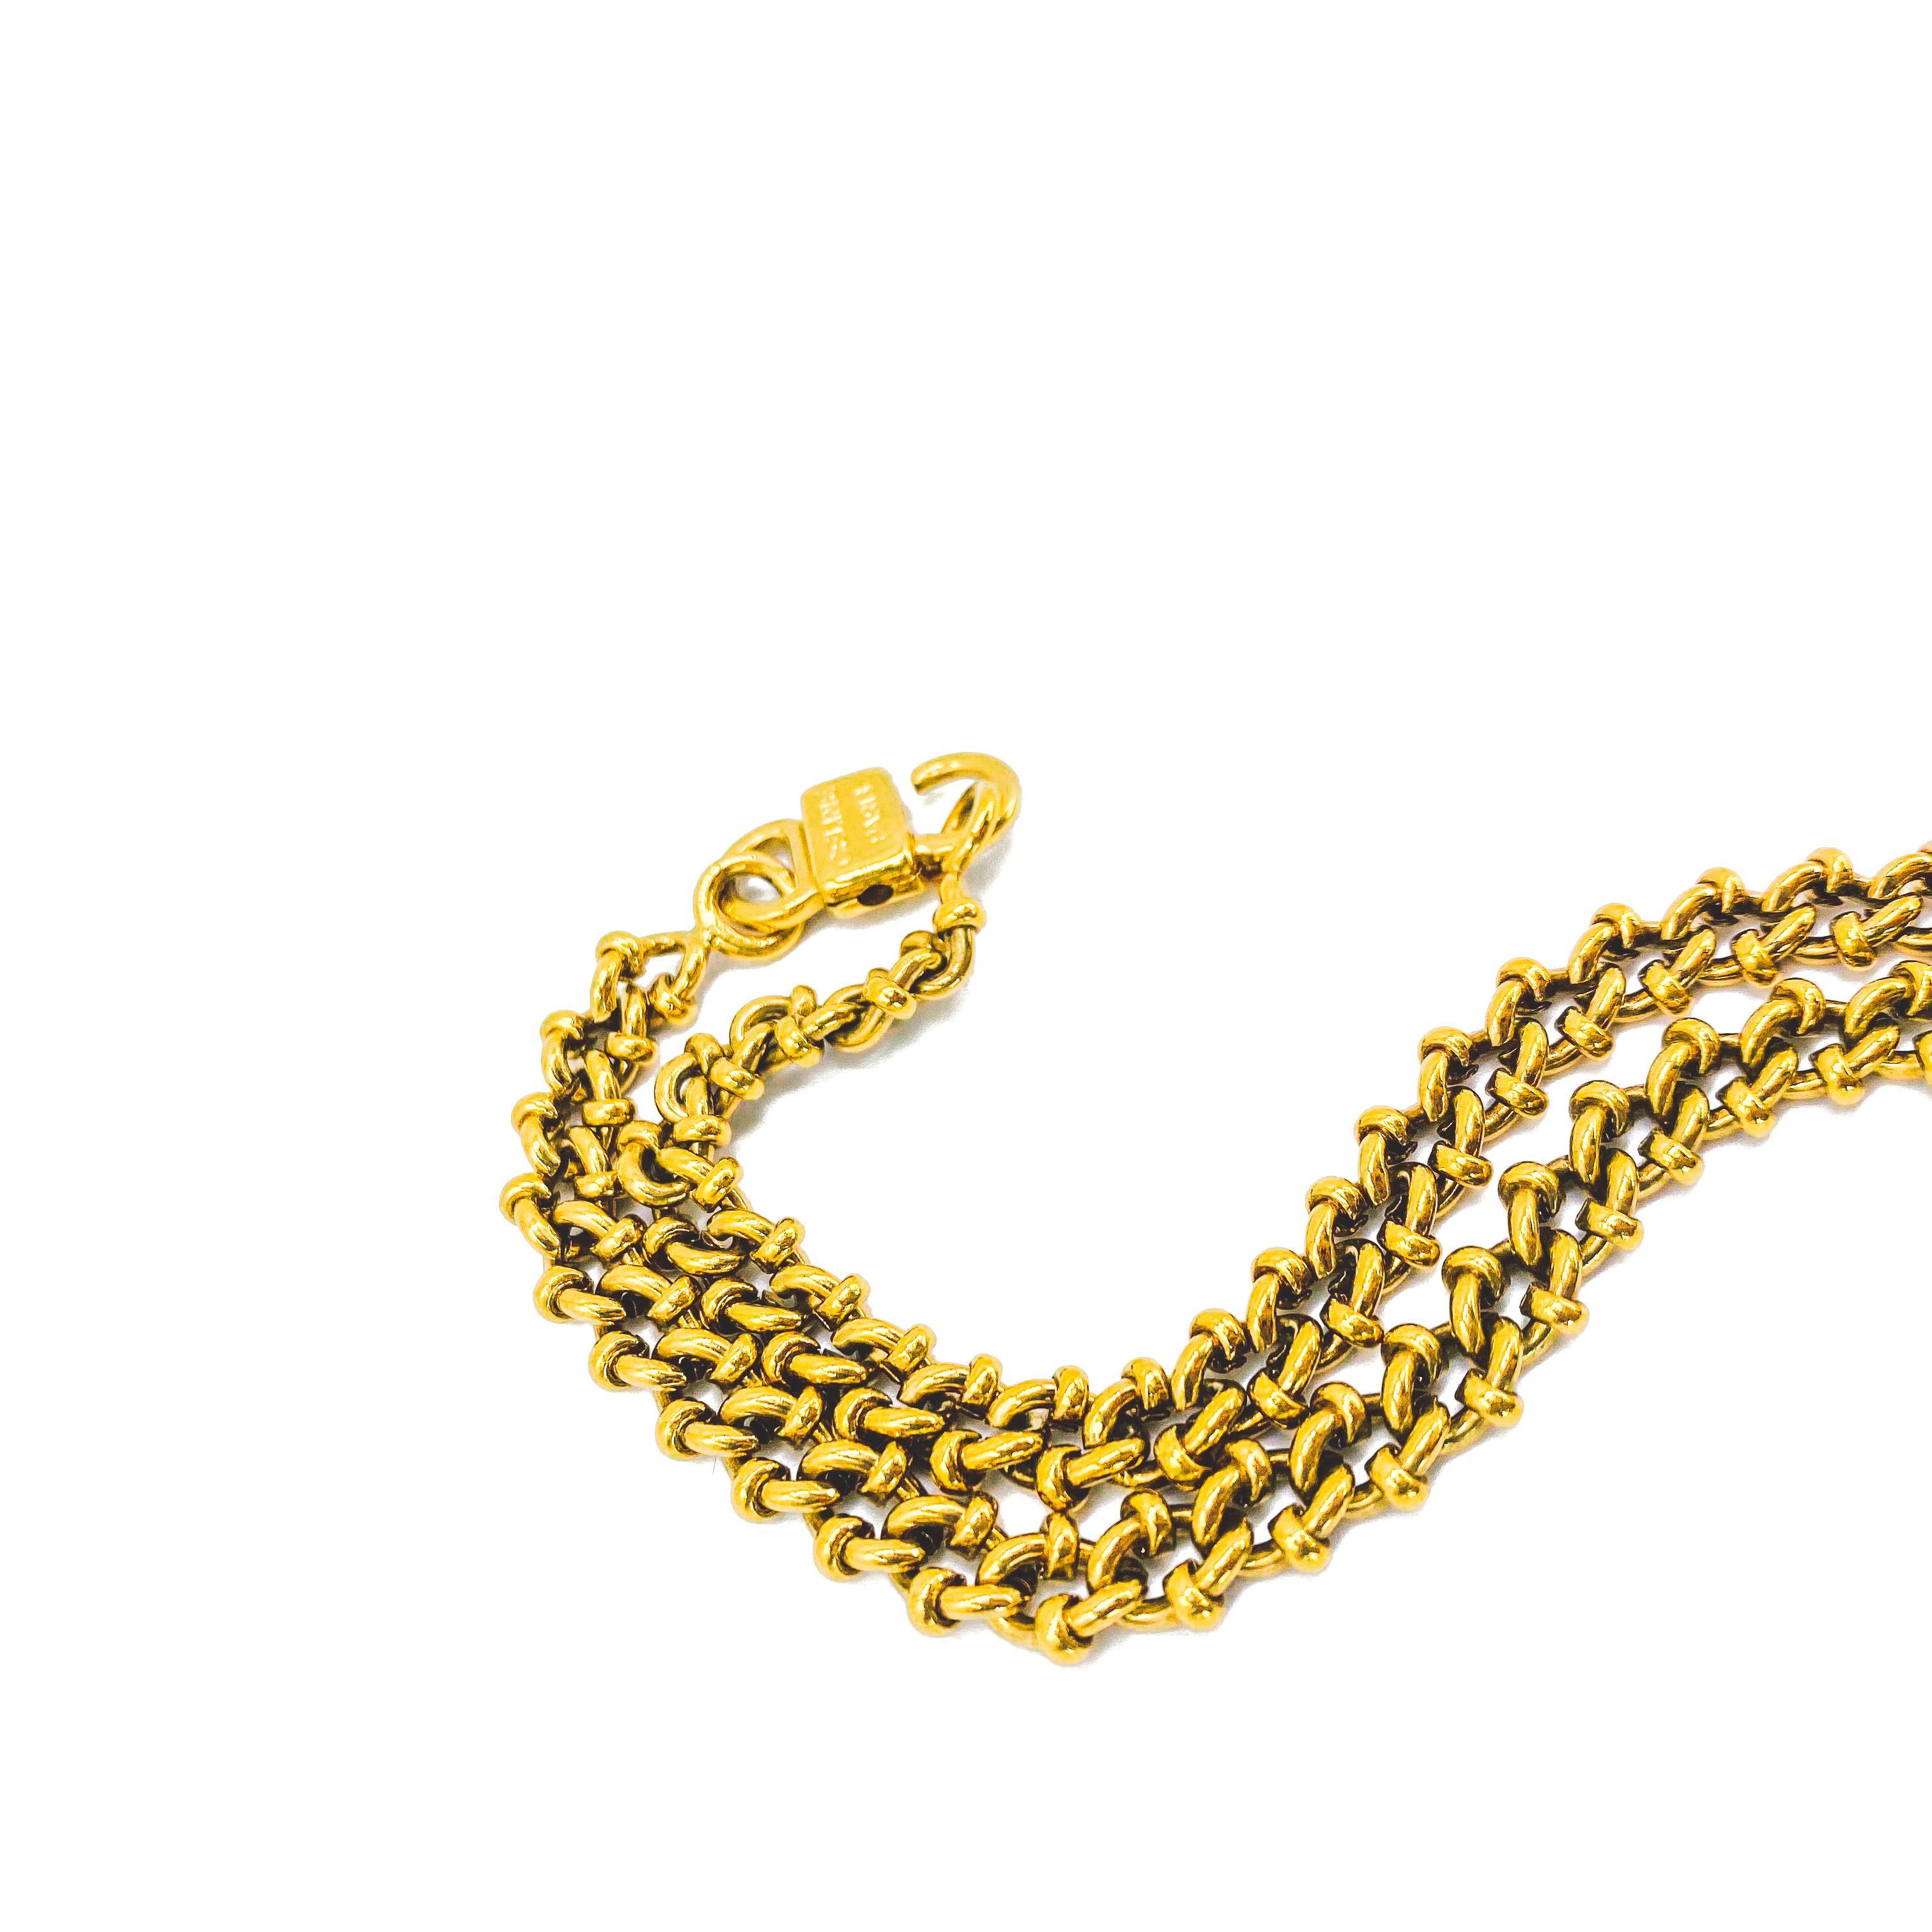 Celine Vintage 1980s Necklace

Detail
-Made in Italy in the 1980s
-Crafted from high quality gold plated metal
-Chunky chain with small triomphe macadam logos

Size & Fit
-Approx 35 inches in length

Authenticity & Condition 
-Fully examined and